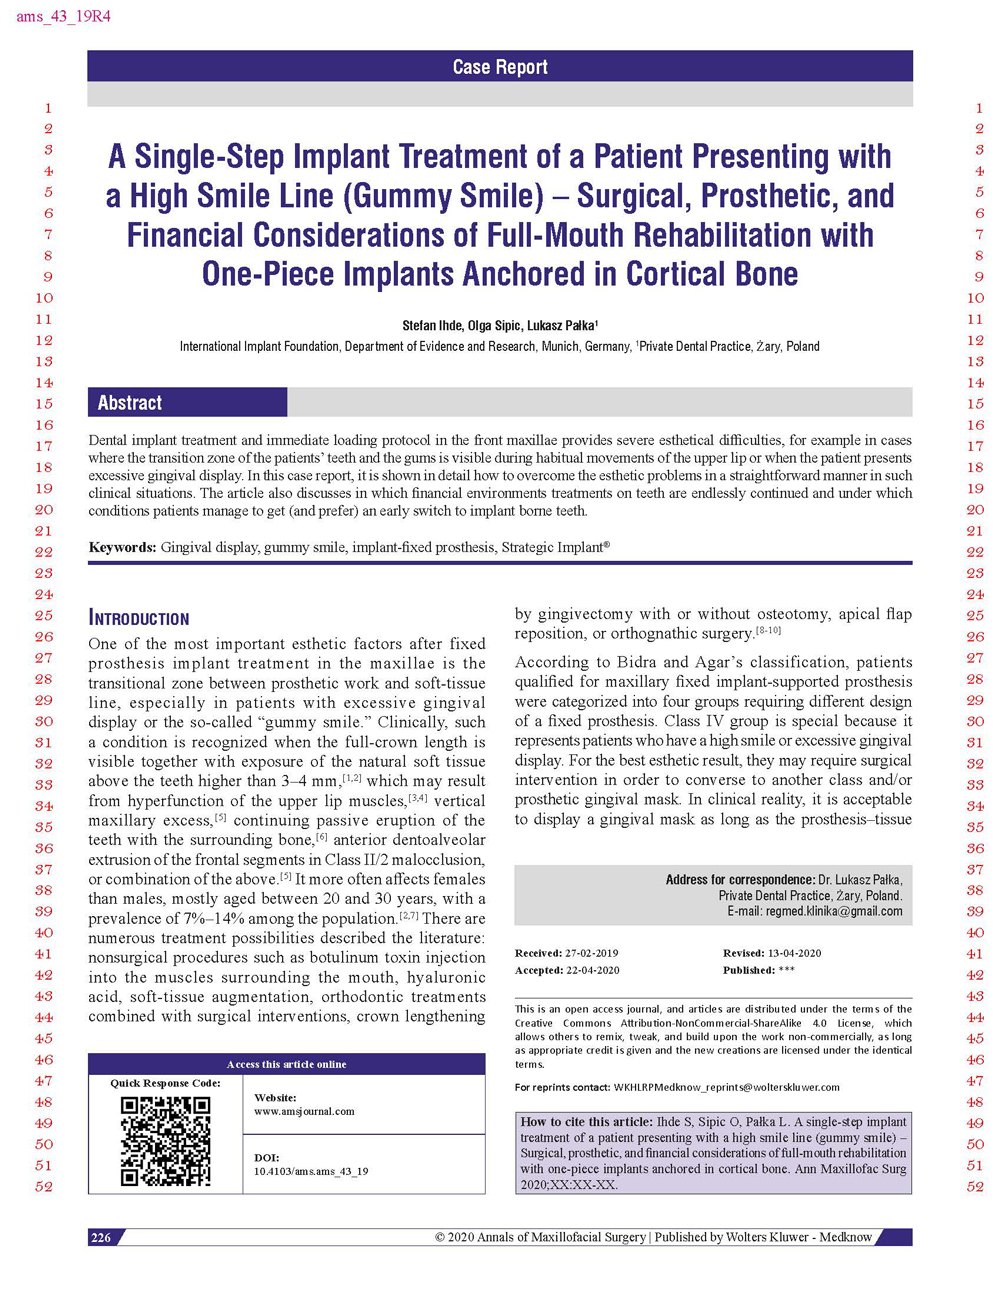 Preview Annals of Maxillofacial Surgery Vol. 10 Issue 2 - July-December 2020